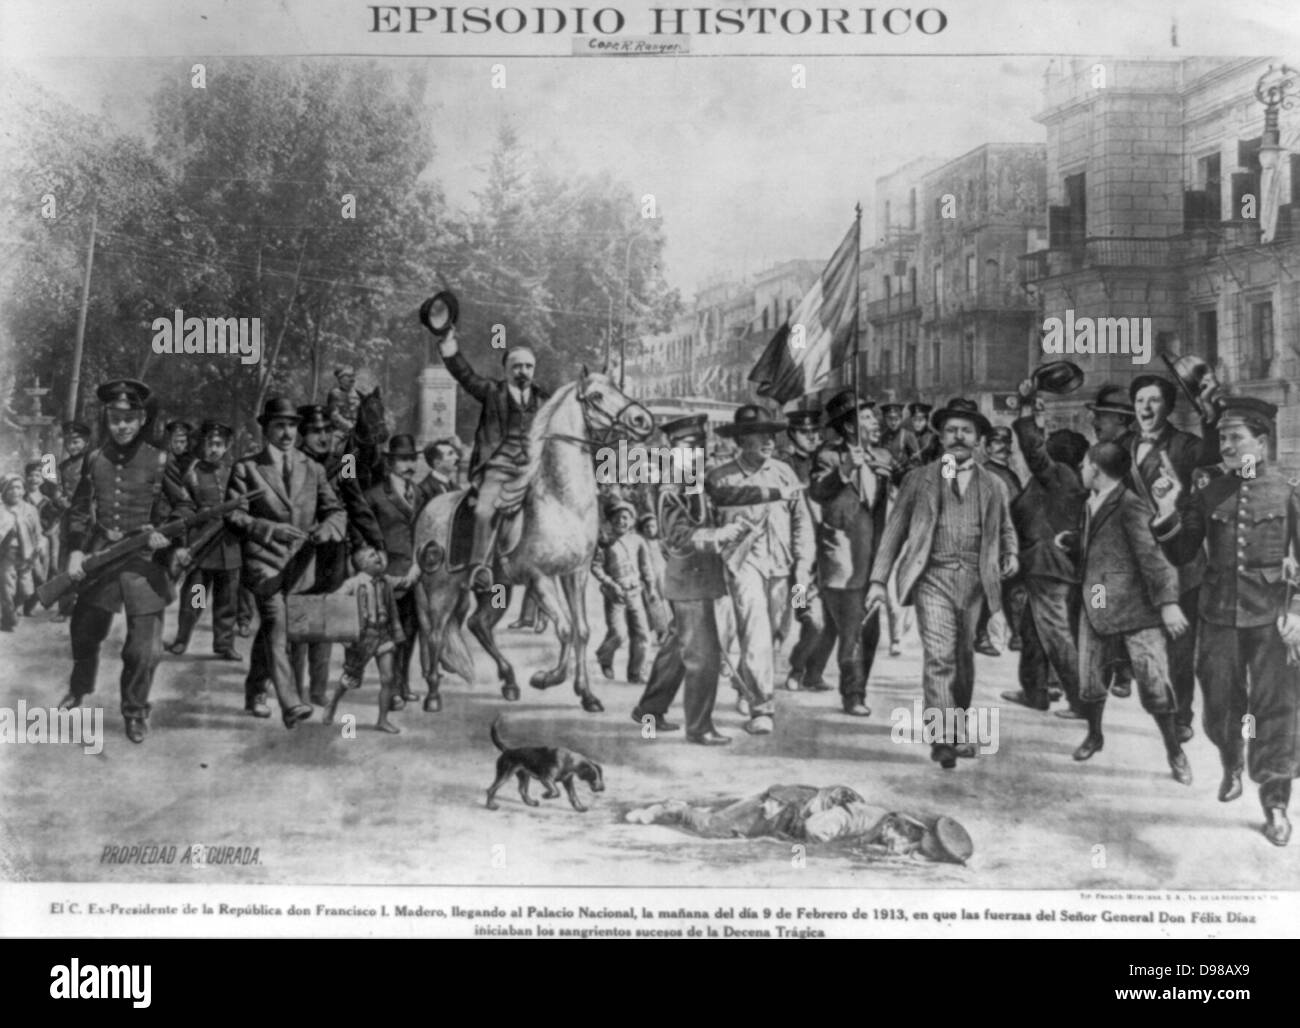 Ex-president of the Republic Don Francisco I. Madero leaving the National Palace on 1913 Feb. 9, with the forces of Señor General Don Félix Díaz, during the Mexican Revolution; dead soldier lying on street in foreground Stock Photo